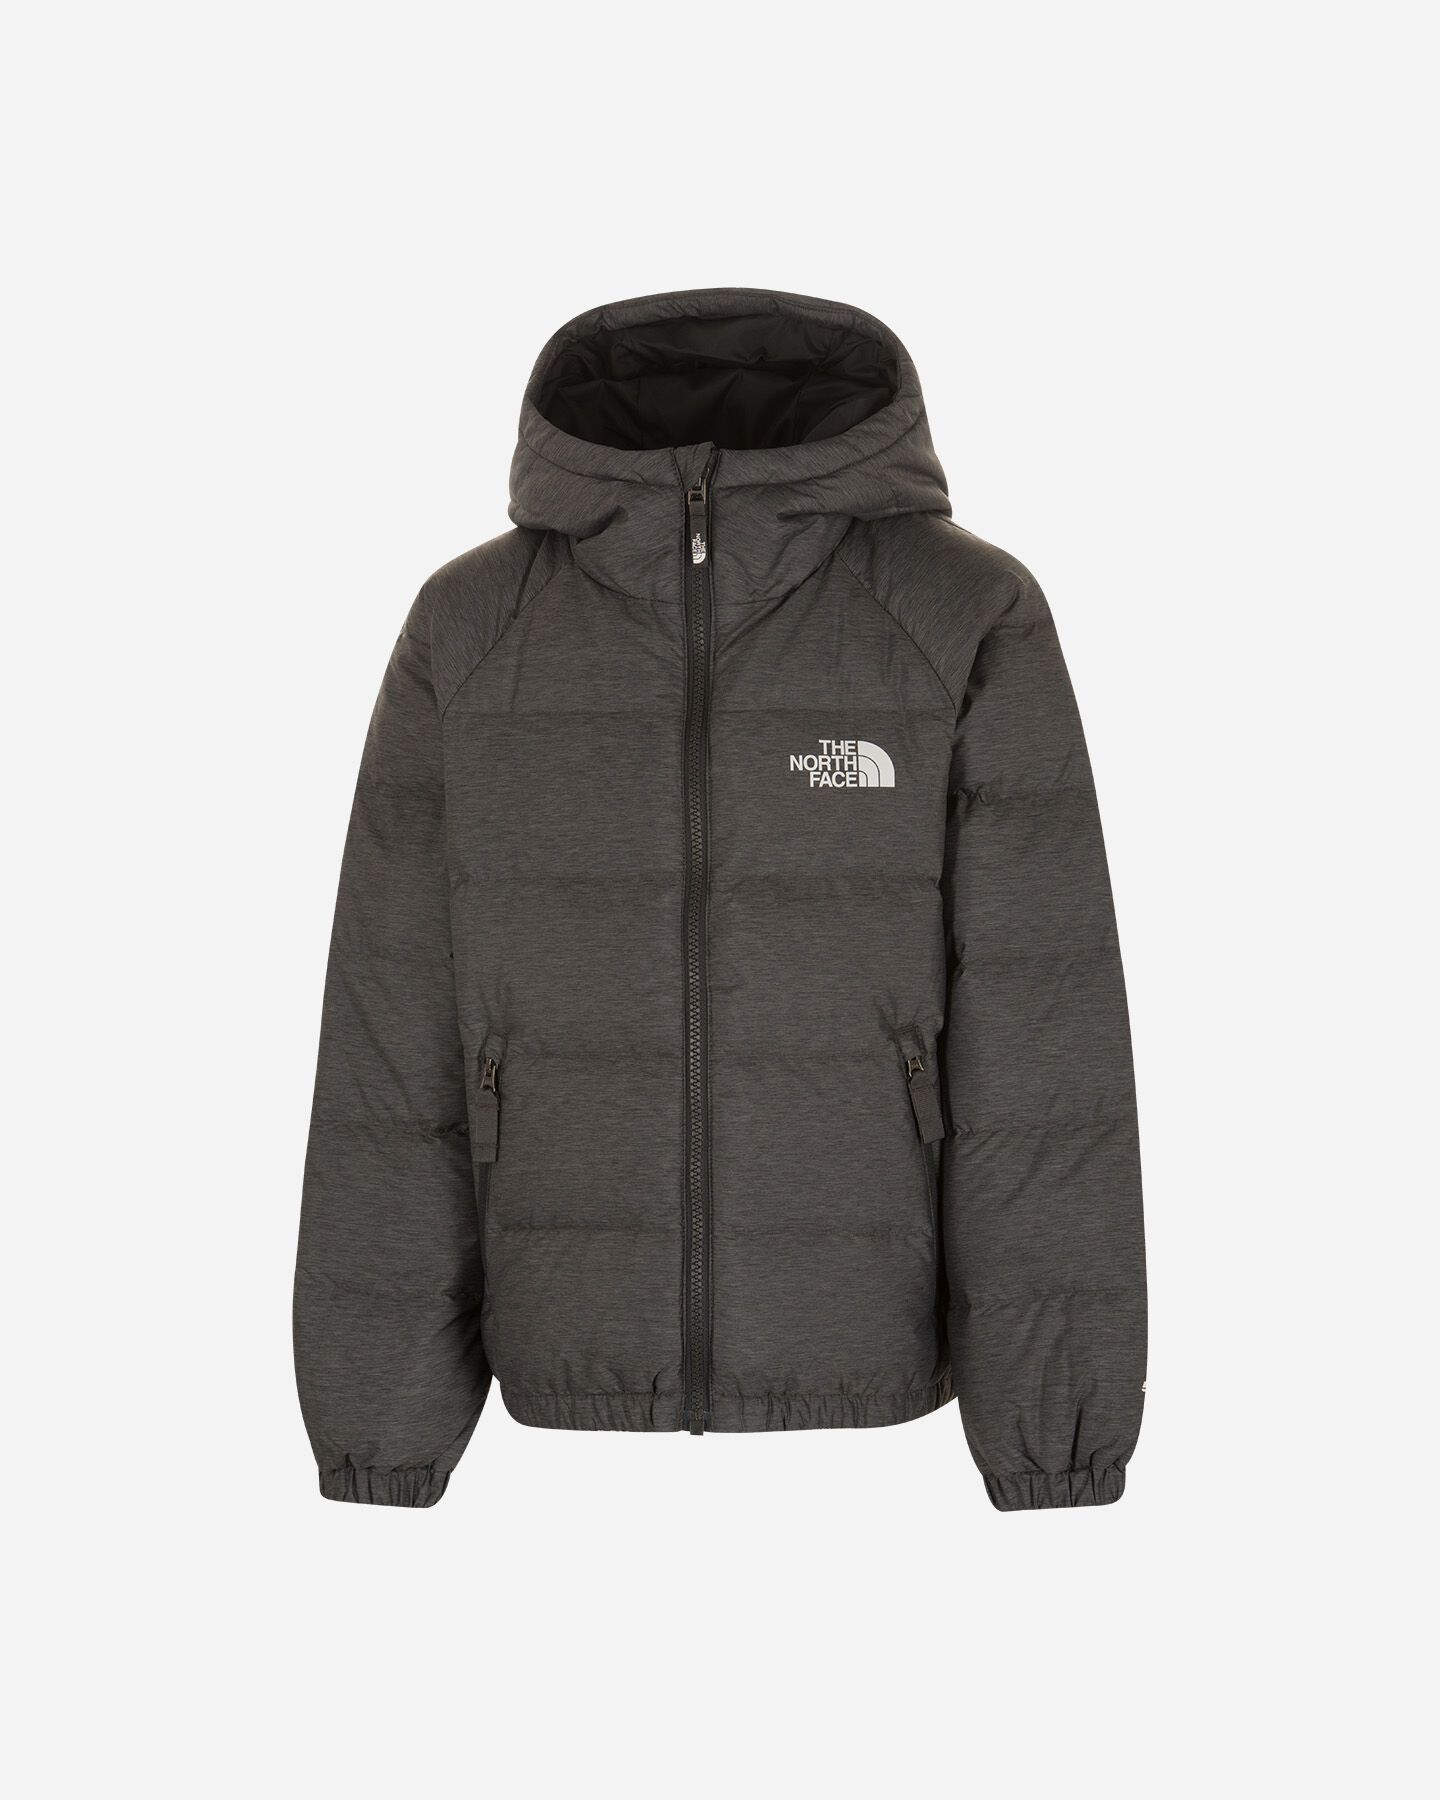  Giacca THE NORTH FACE HYALITE REVERSIBLE JR S5348687|7D1|S scatto 0